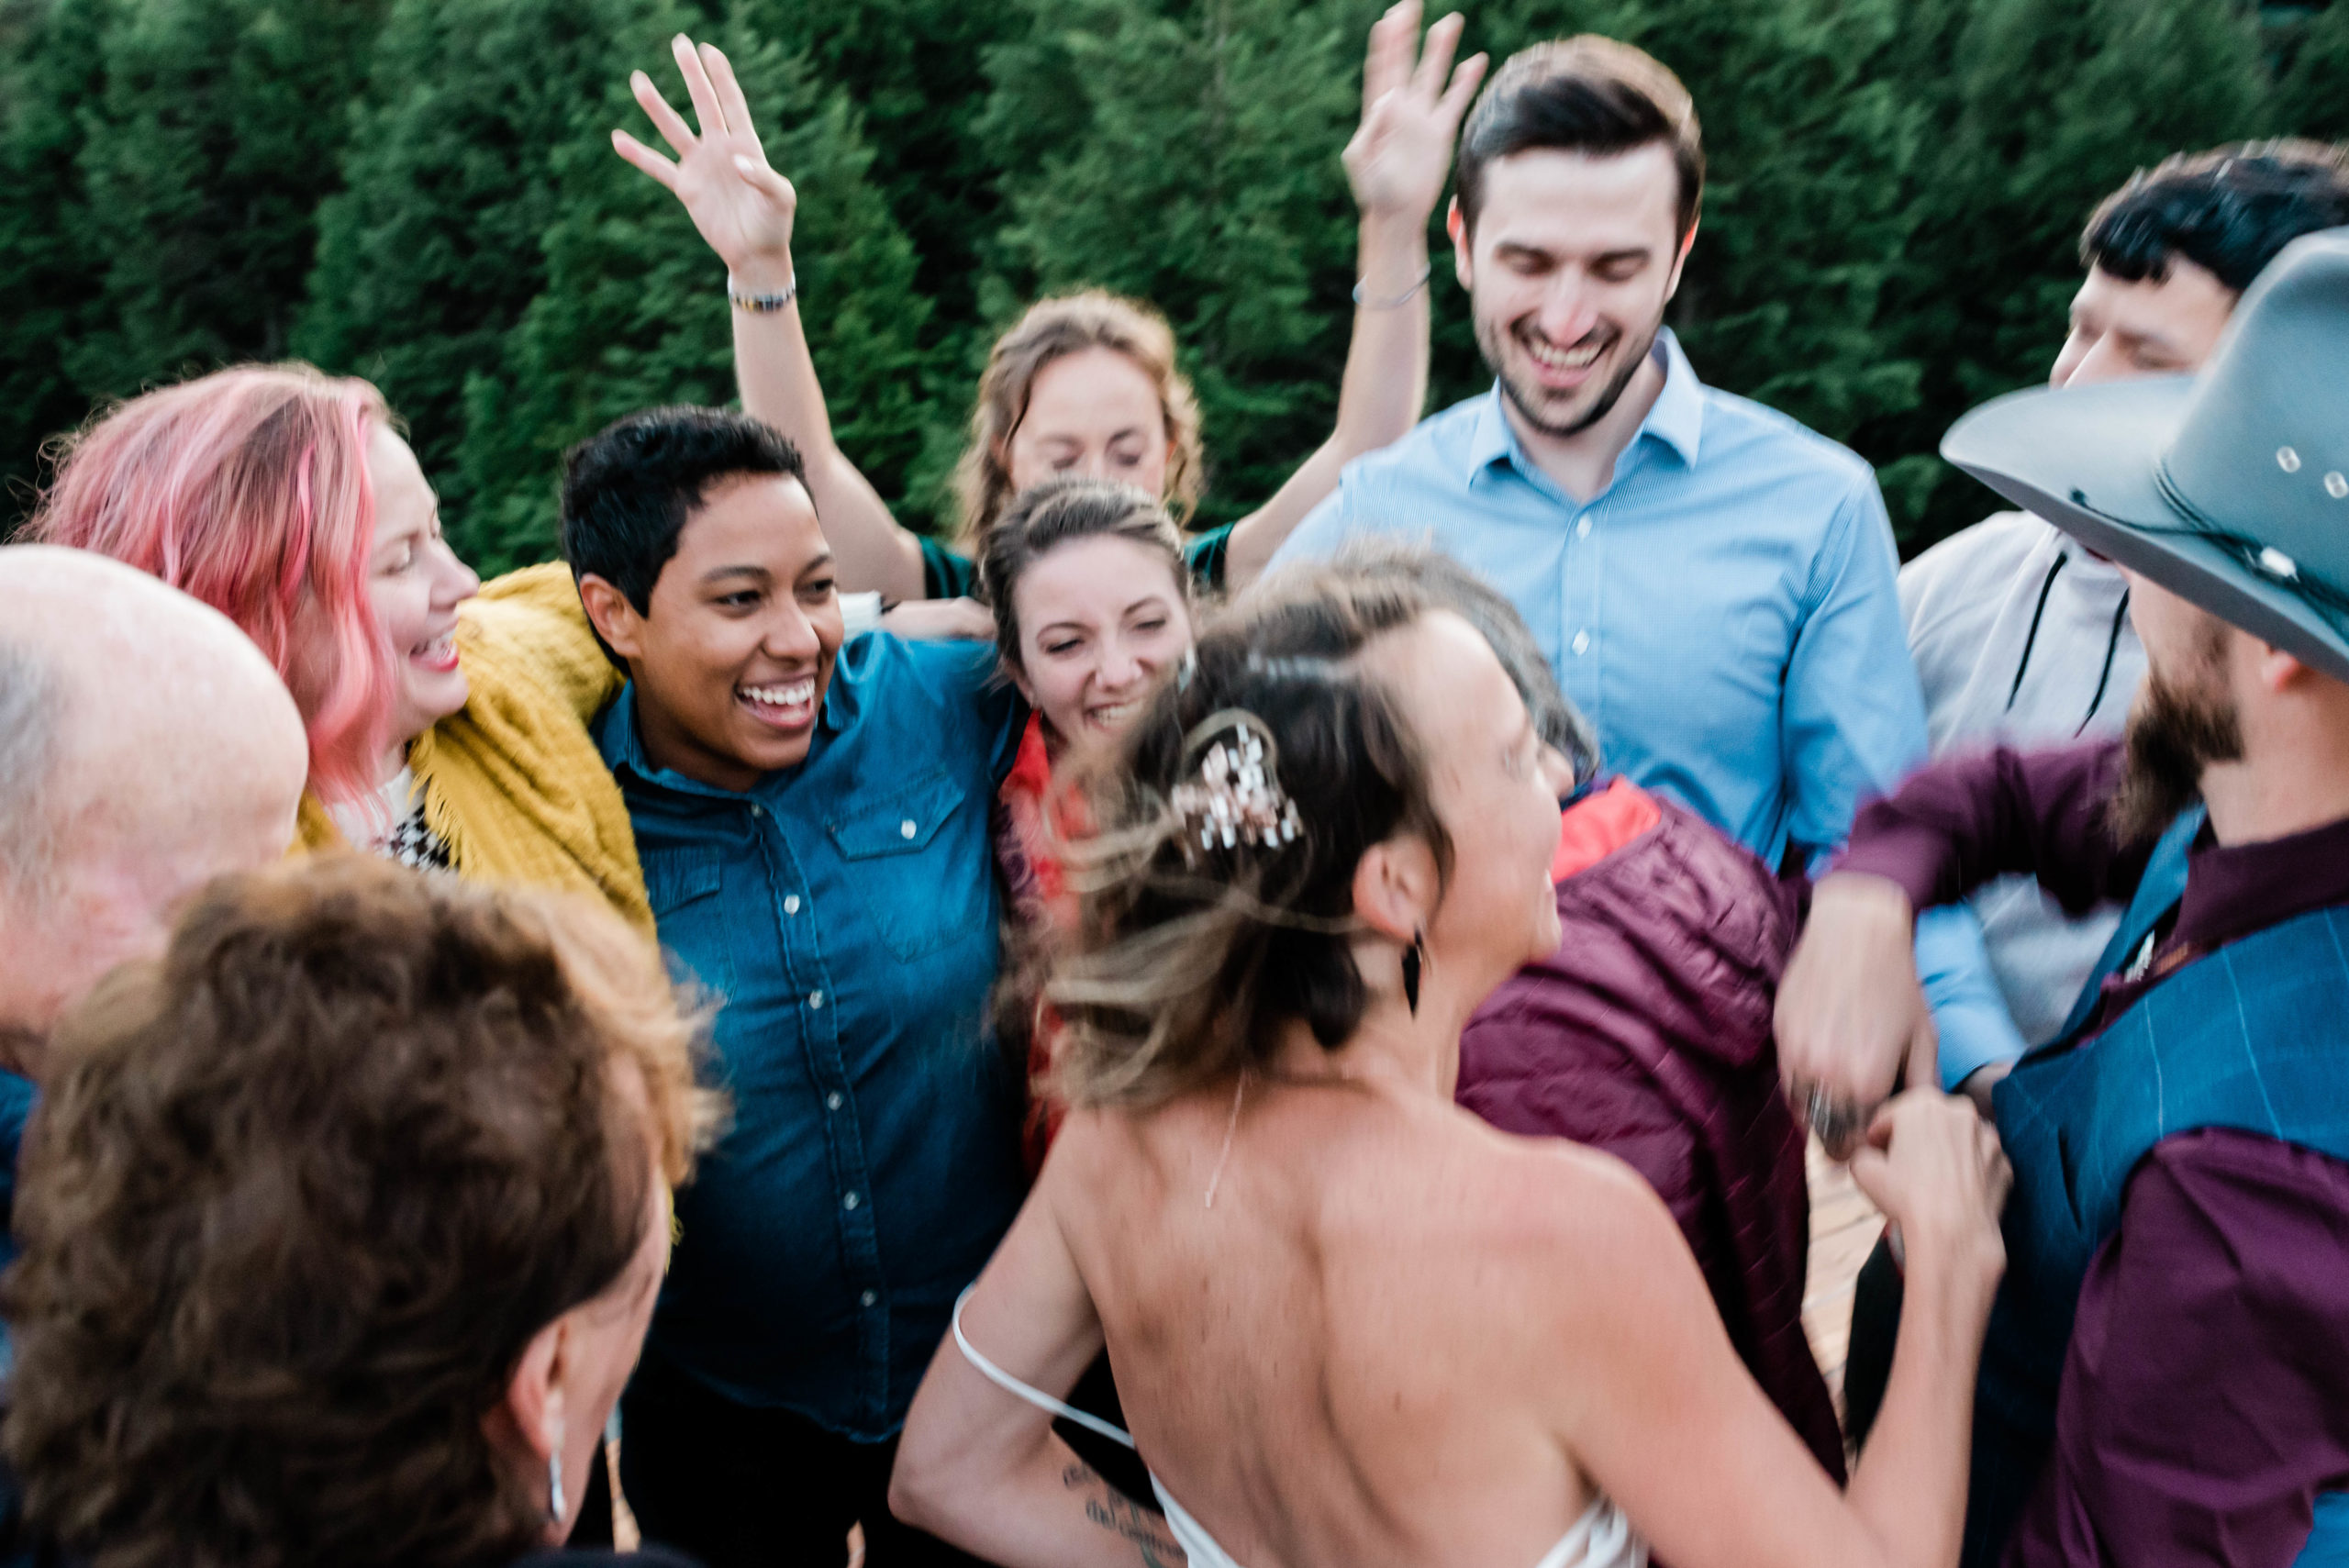 In this picture we see small wedding guest list. They are all dancing together in a circle. Everyone is smiling as the bride and groom dances with them.